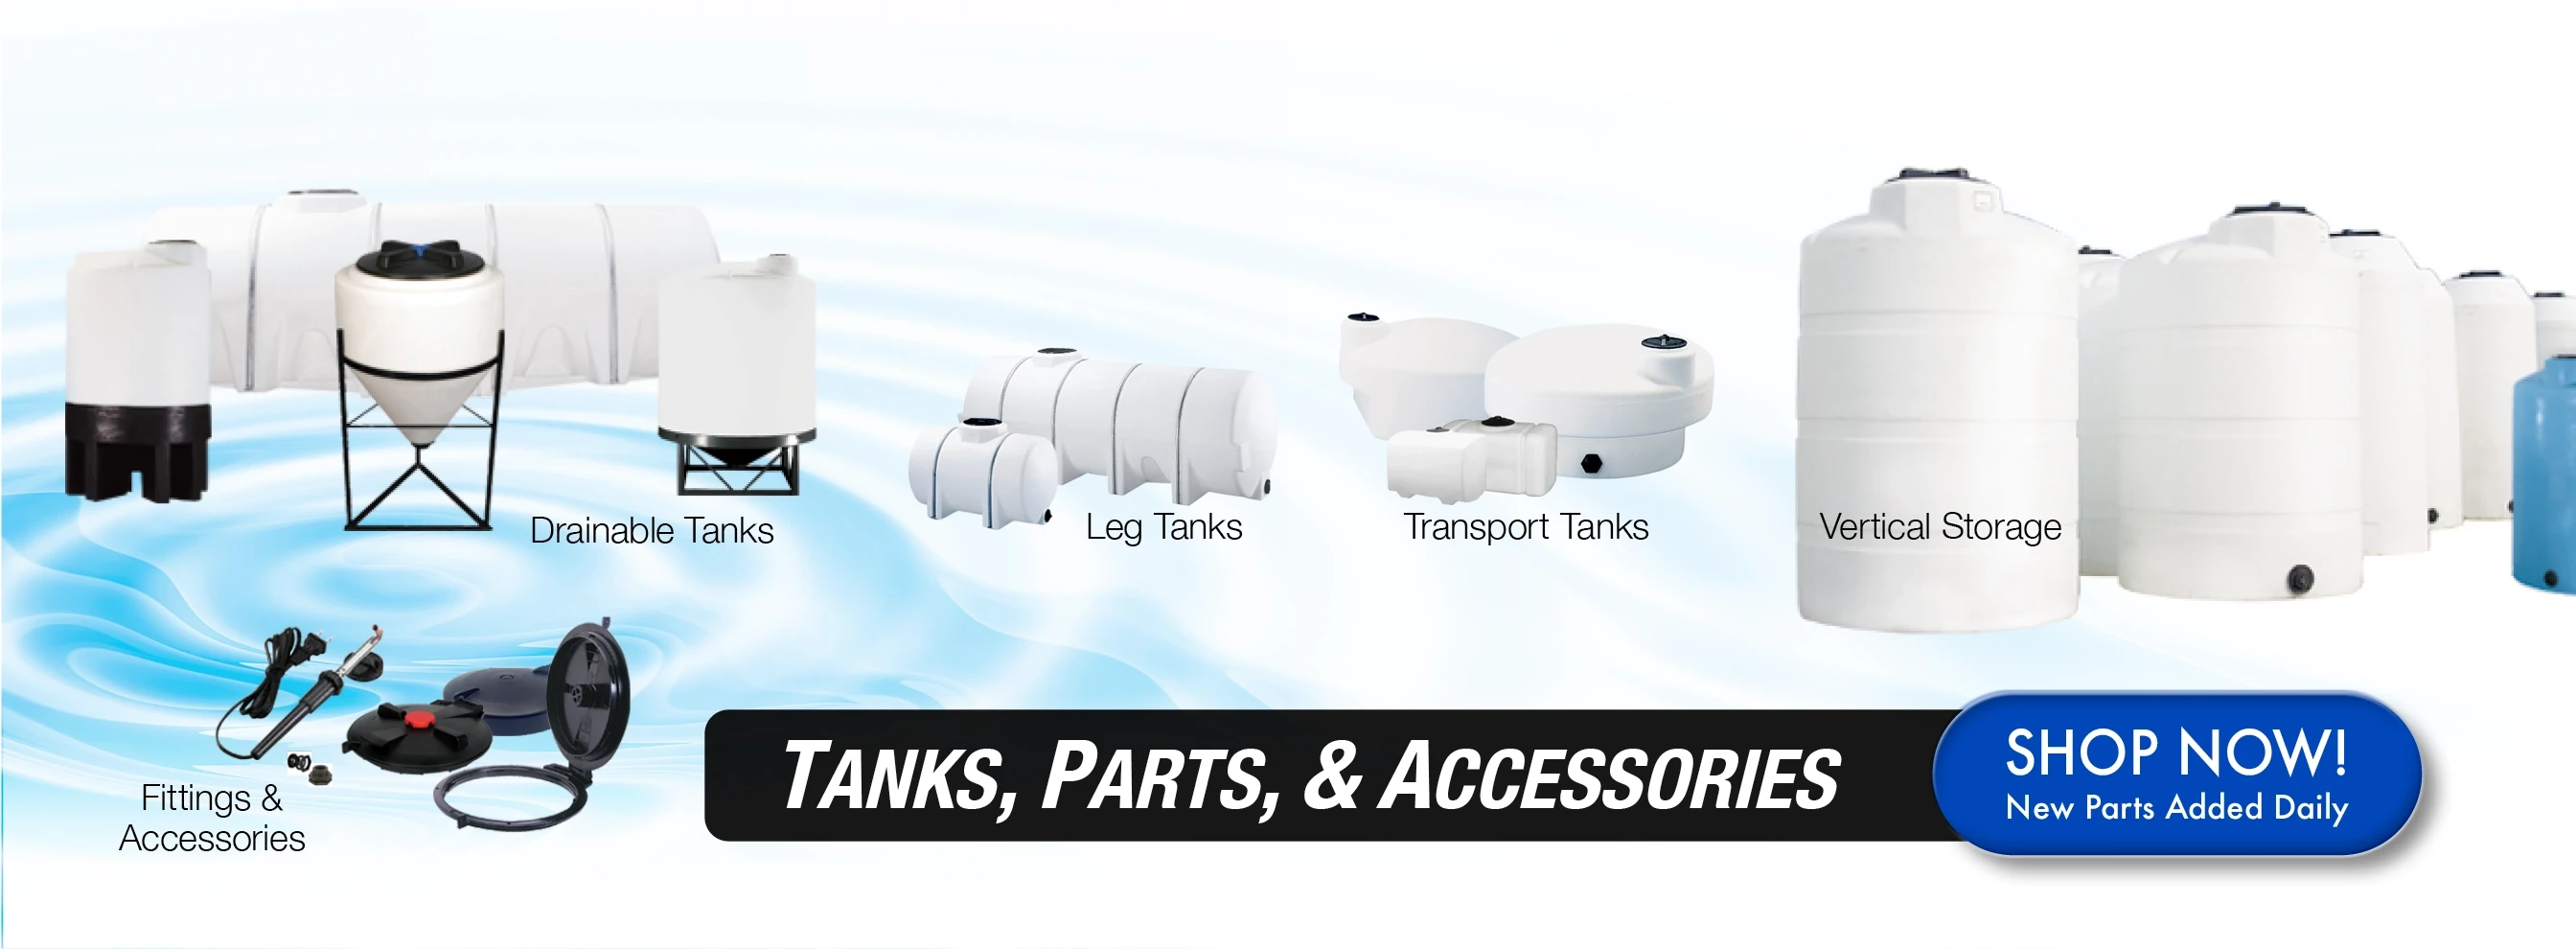 Norwesco liquid storage tanks and accessories: Vertical, horizontal, elliptical, specialty, transport, valves and fittings